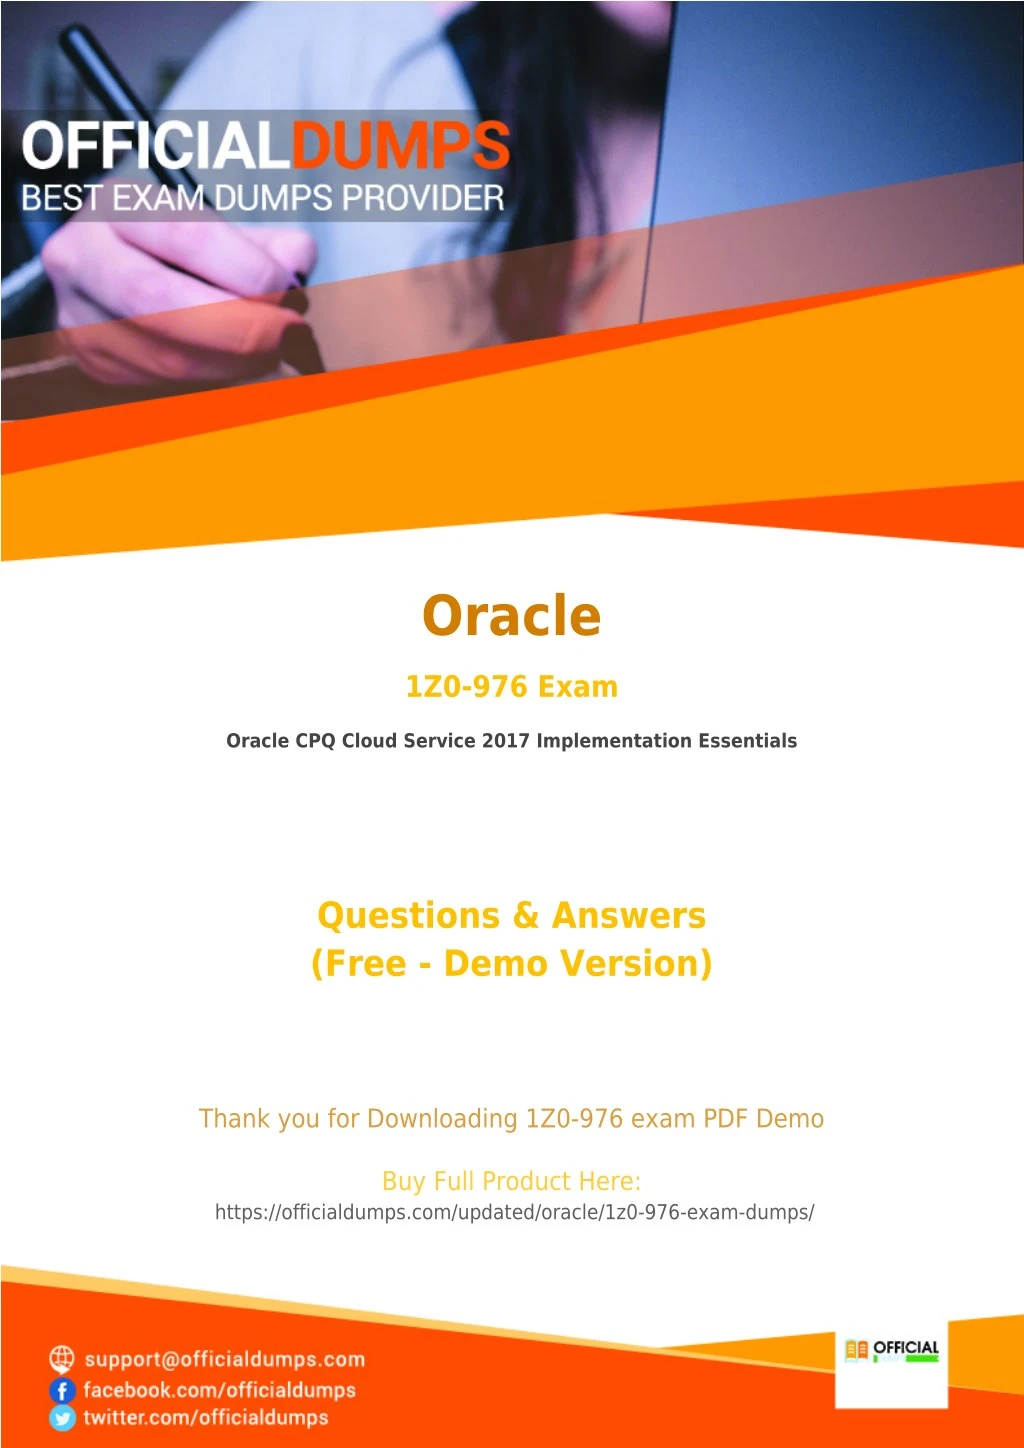 Ppt 1z0 976 Pdf Test Your Knowledge With Actual Oracle 1z0 976 Exam Questions Officialdumps Powerpoint Presentation Id 7857327